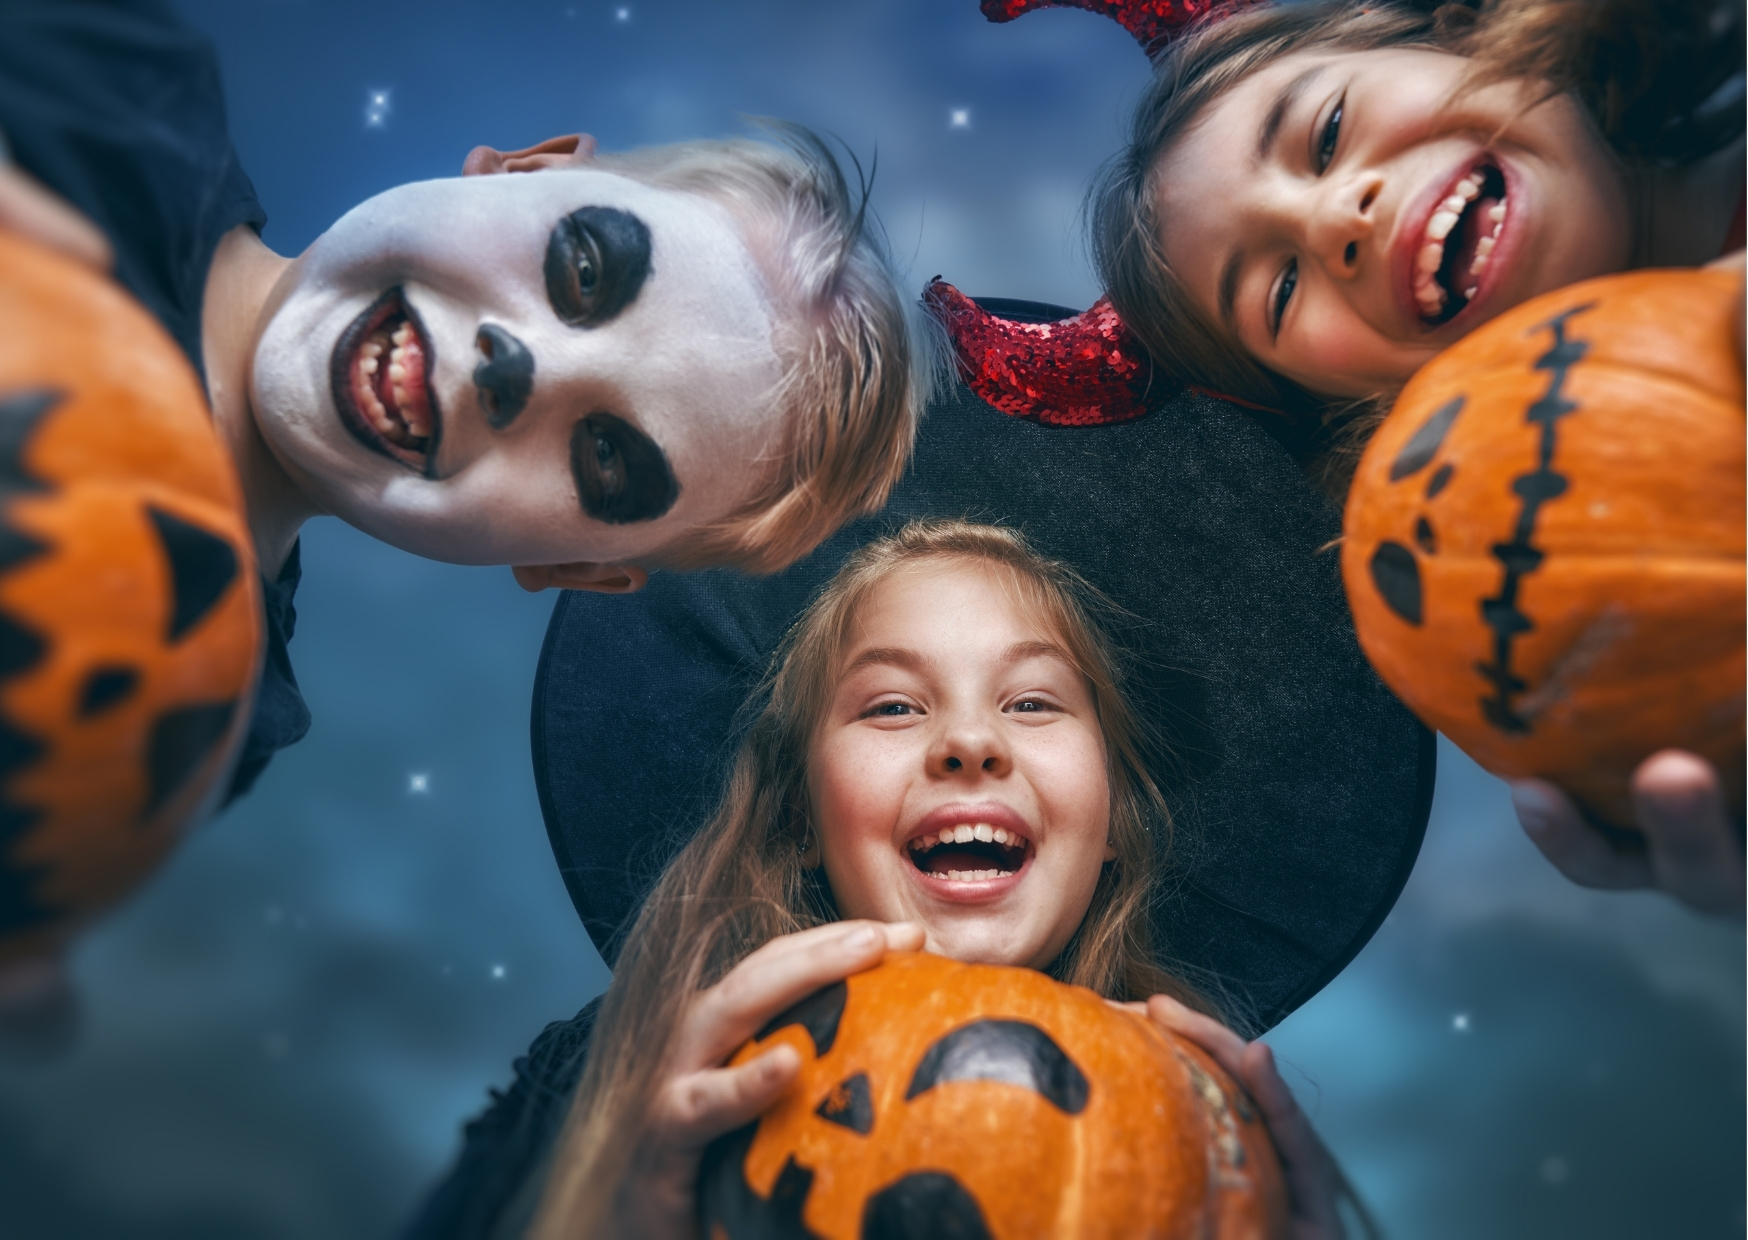 Get your spook on this Halloween at Golden Sands